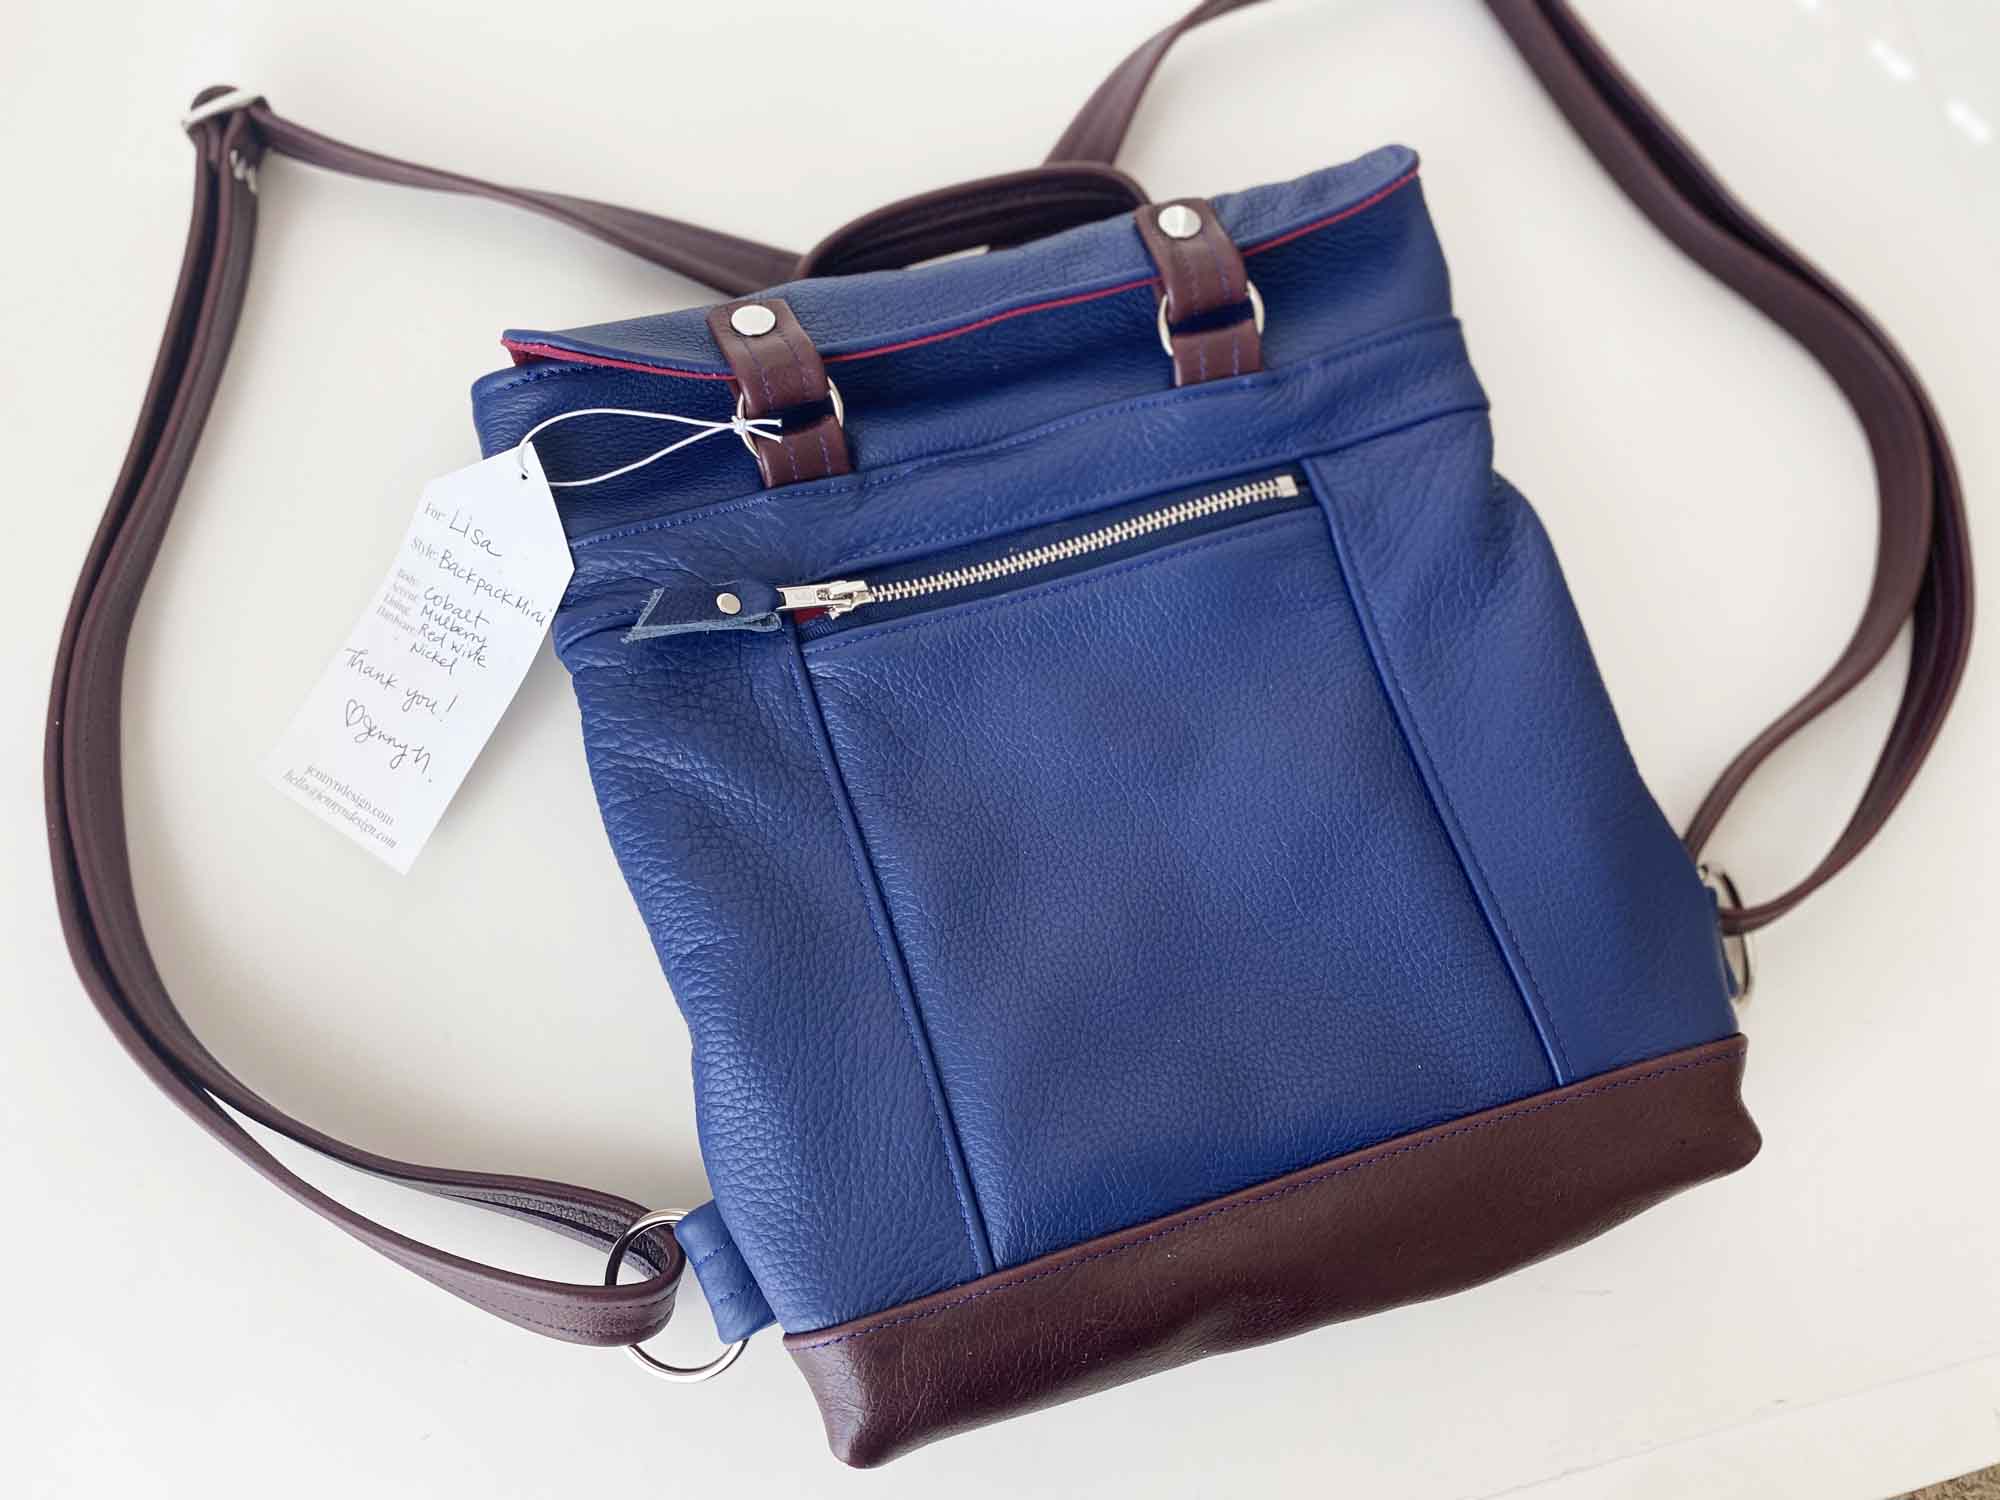 Backpack Mini in Cobalt, Mulberry